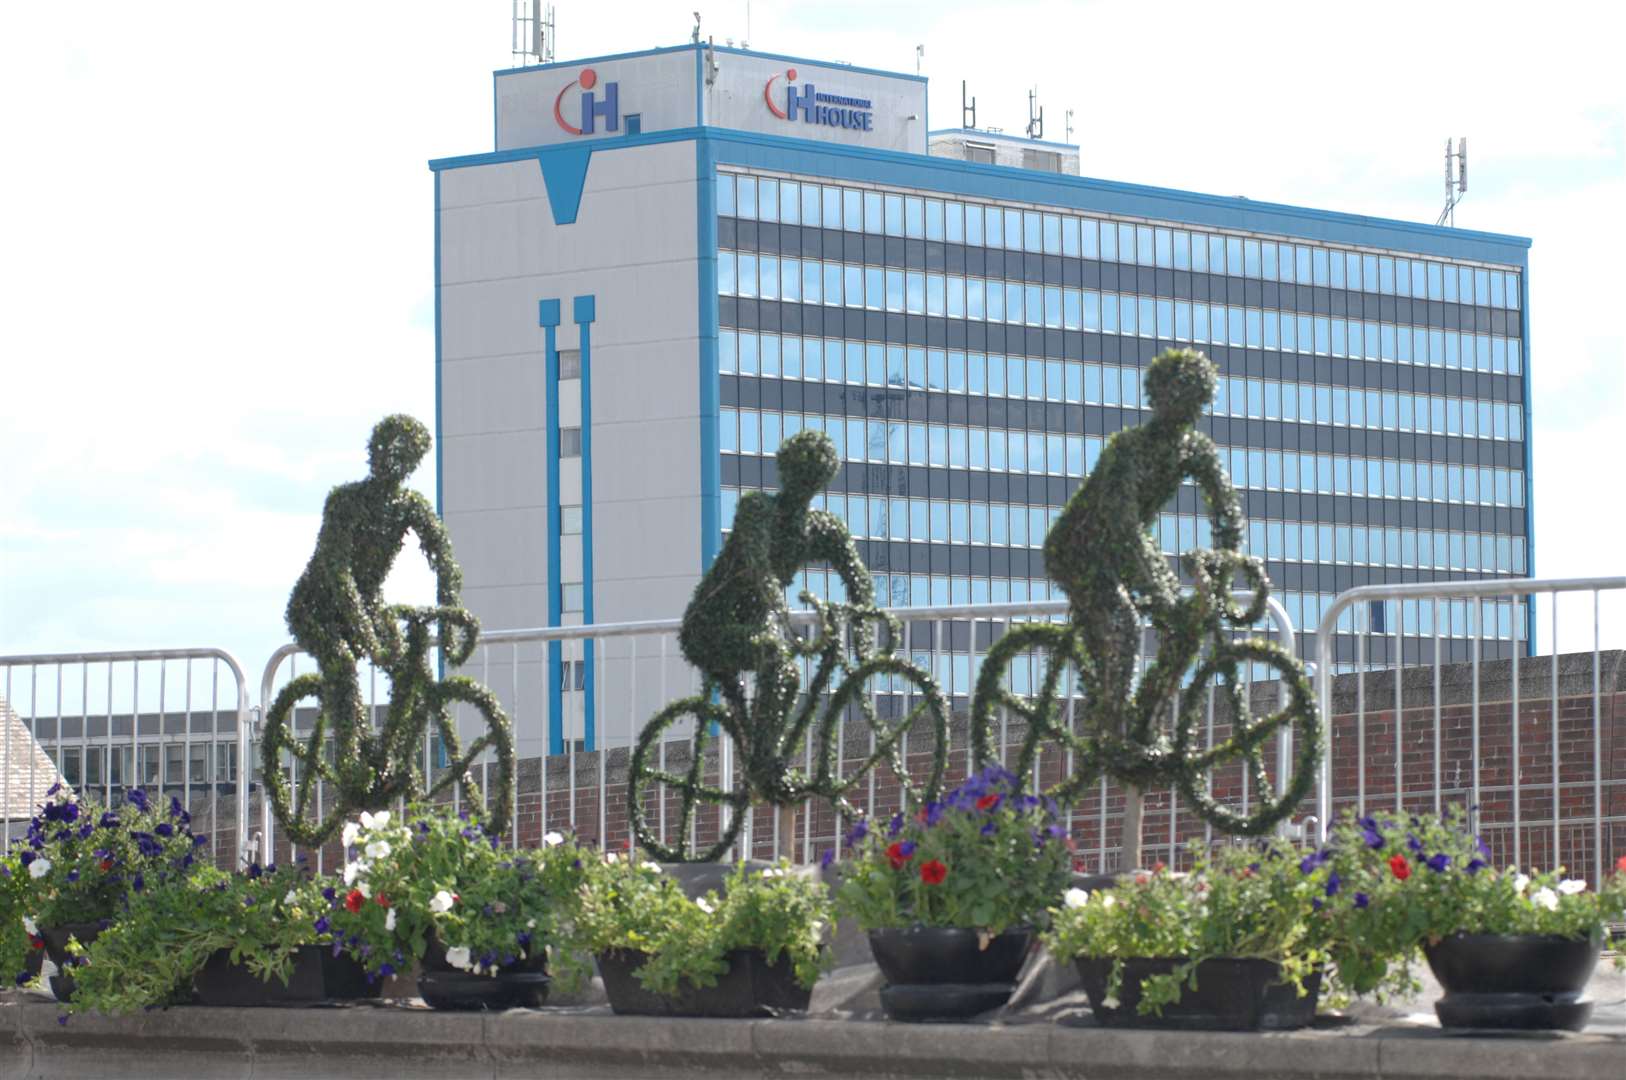 Cyclist topiary, with Ashford's International House in the background